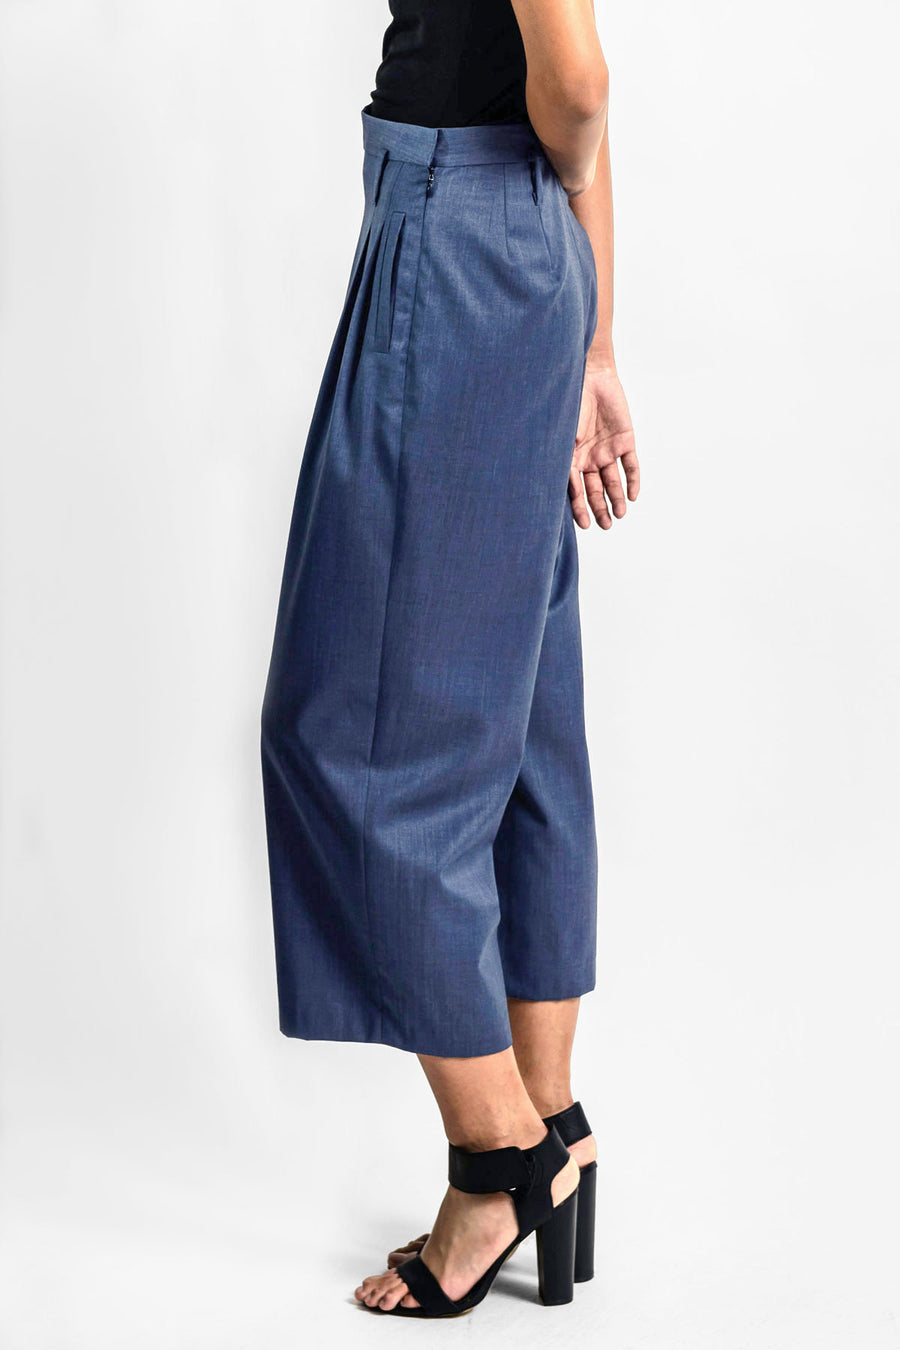 Tailored Culottes - Blue (US 4, 6, 8)